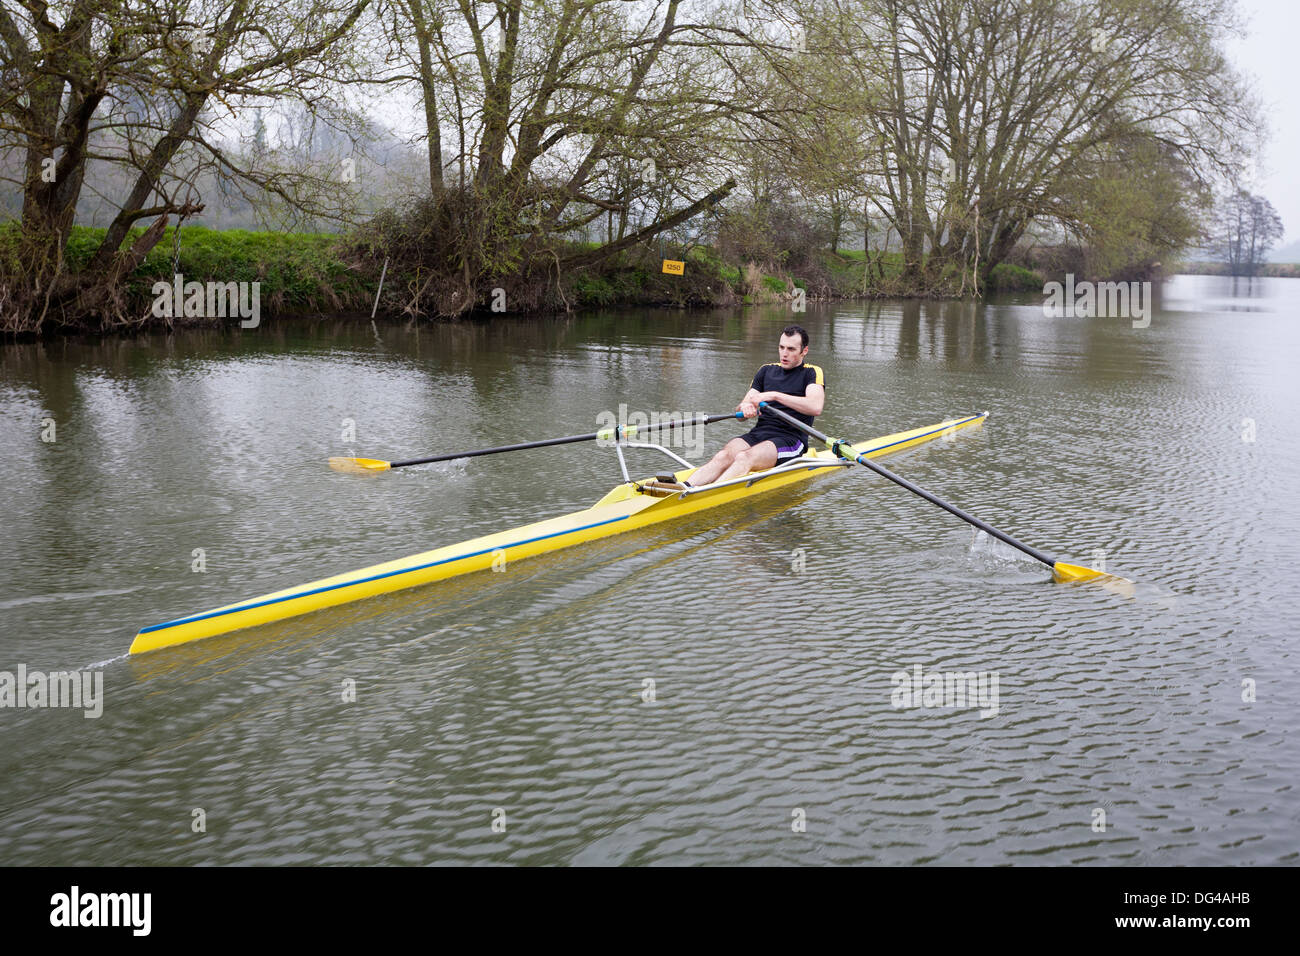 One Man in a scull rowing boat on the river Avon in Bath, UK. Stock Photo